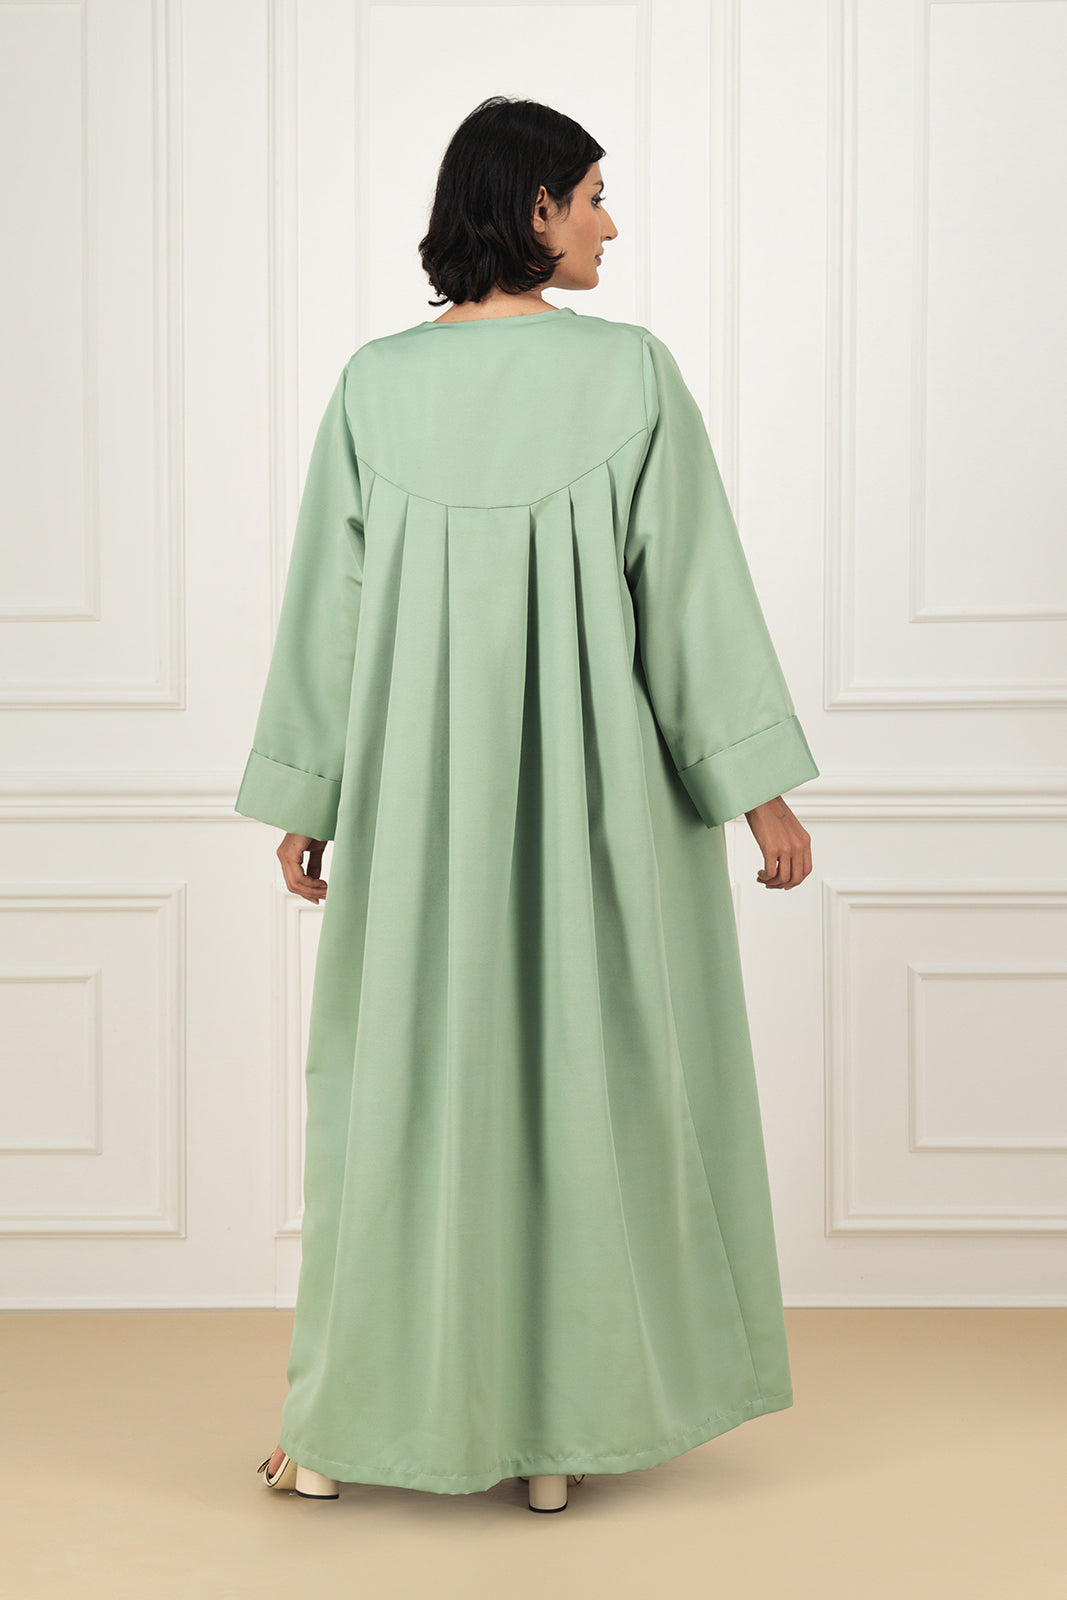 Classic textured abaya with lapels and touches of beads work